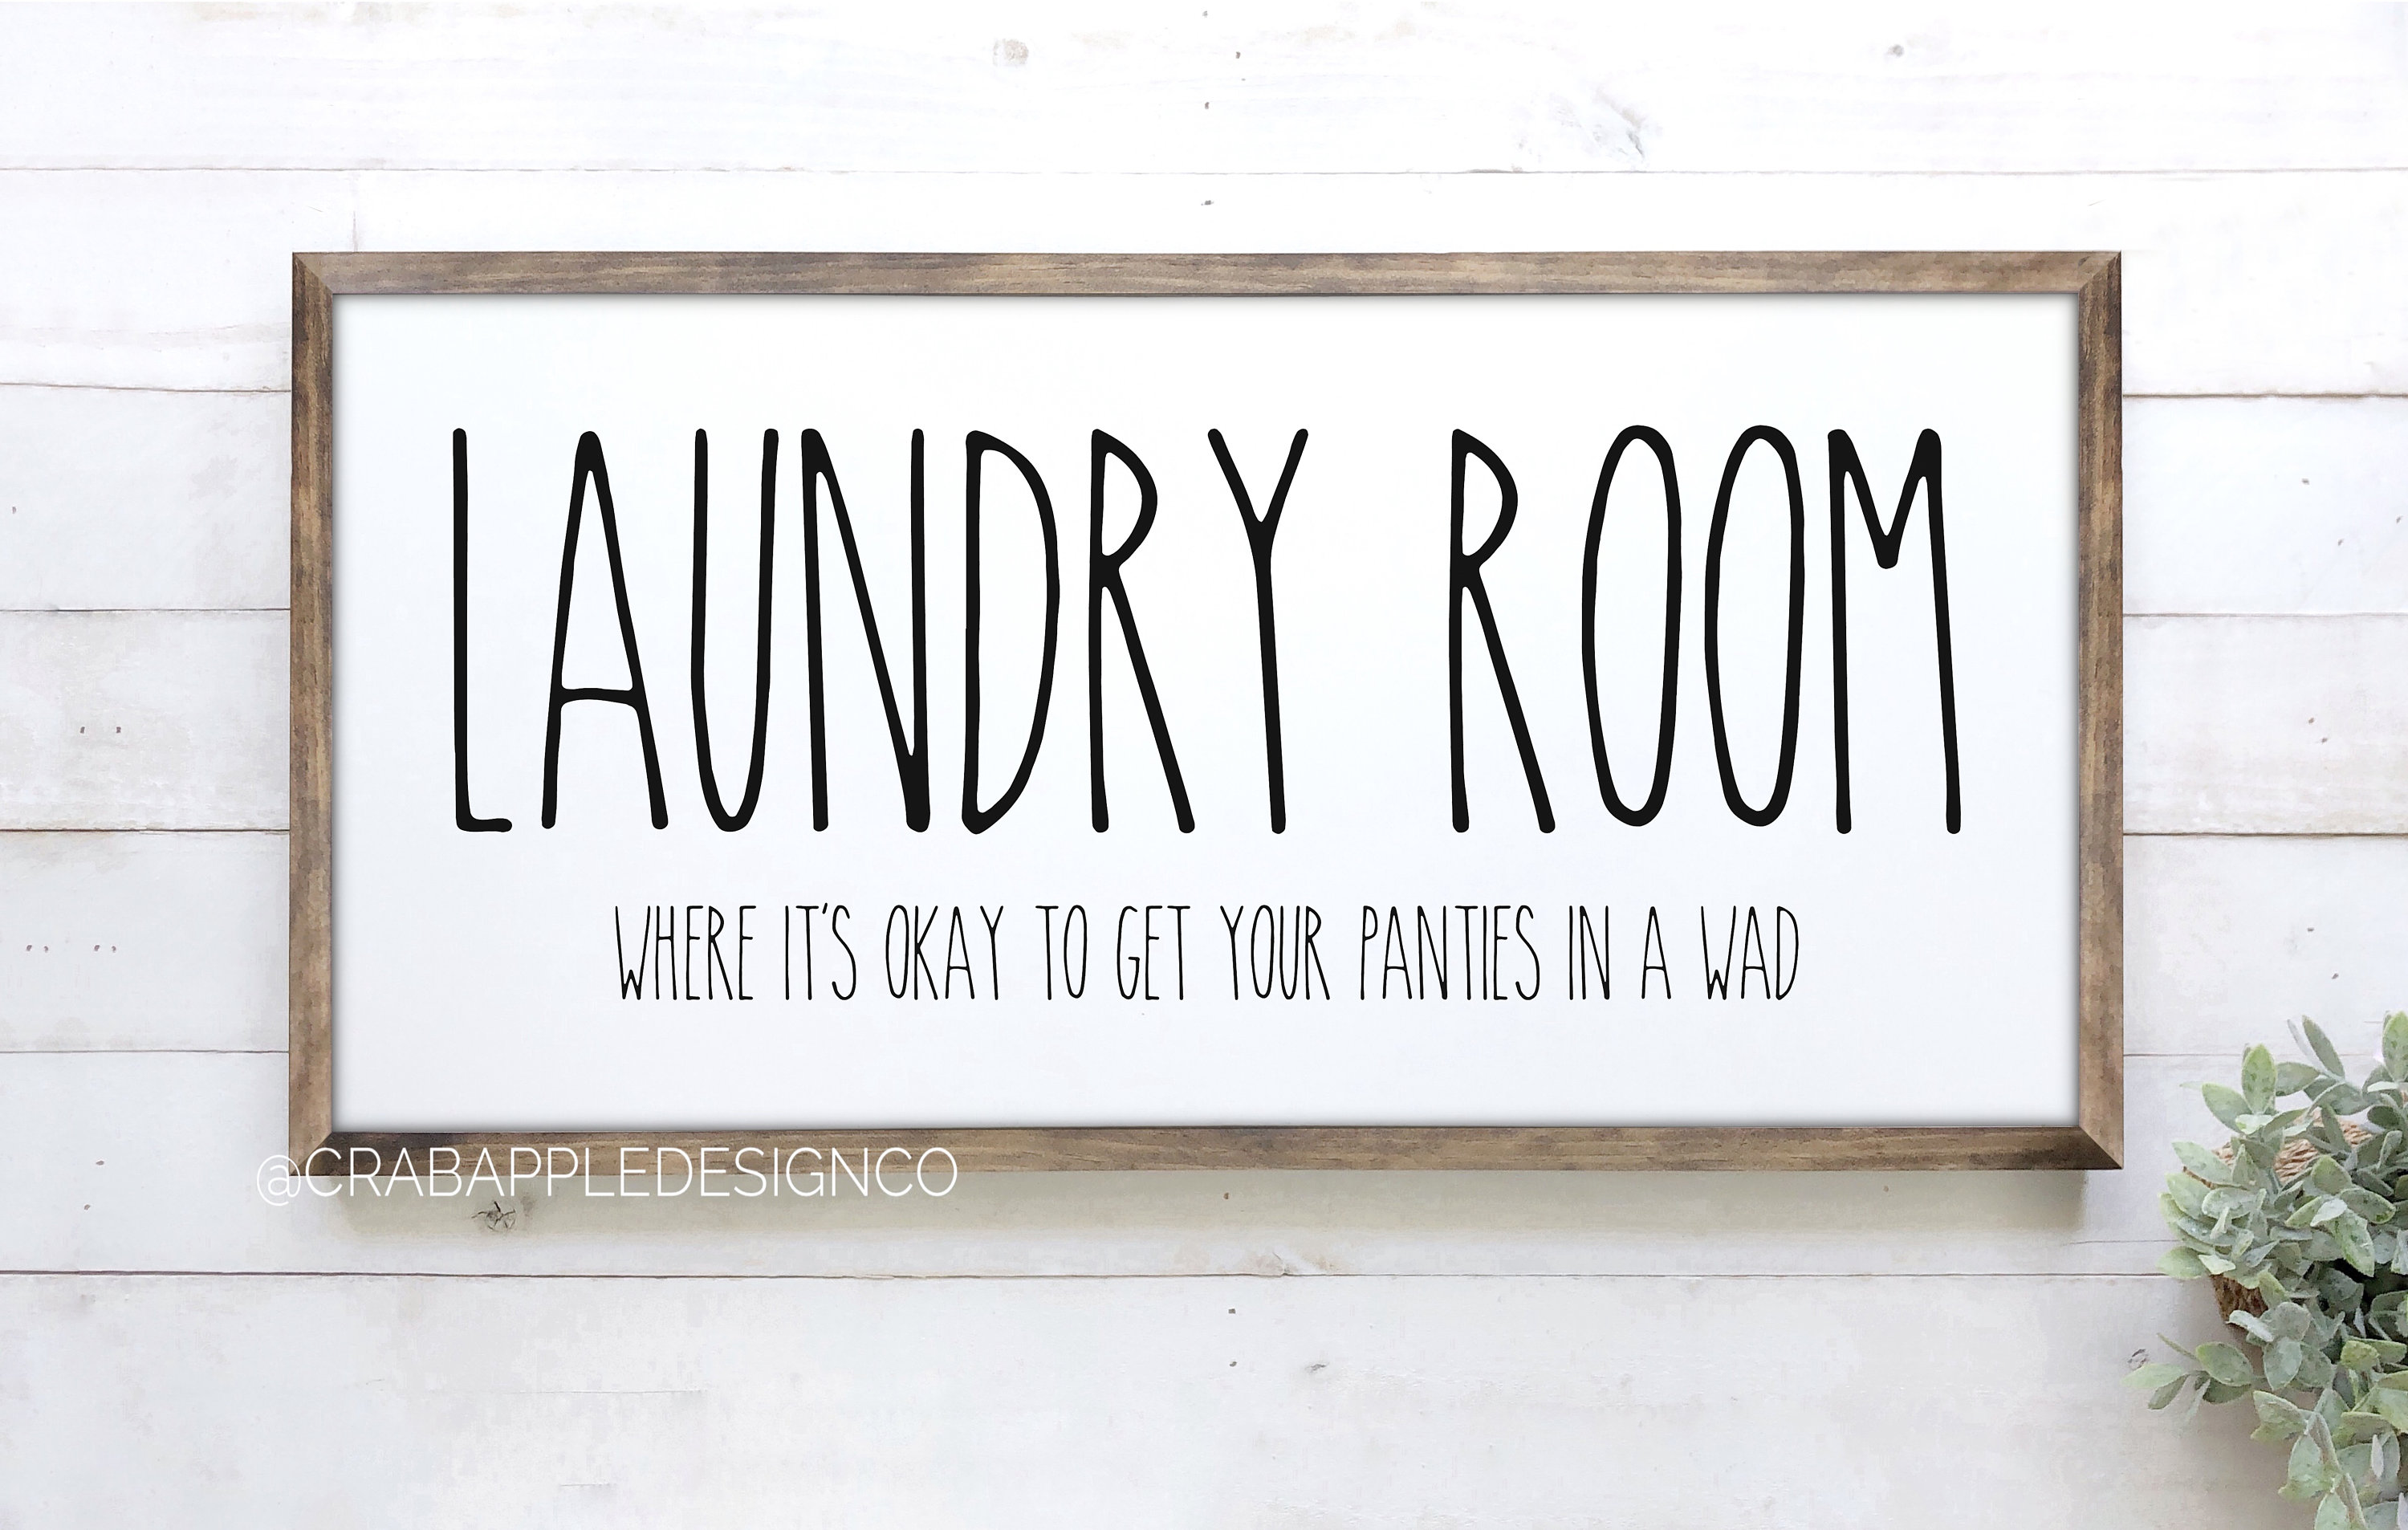 Details about   Laundry Signs for Home Decor Loads of Fun Laundry Room Wooden Sign 